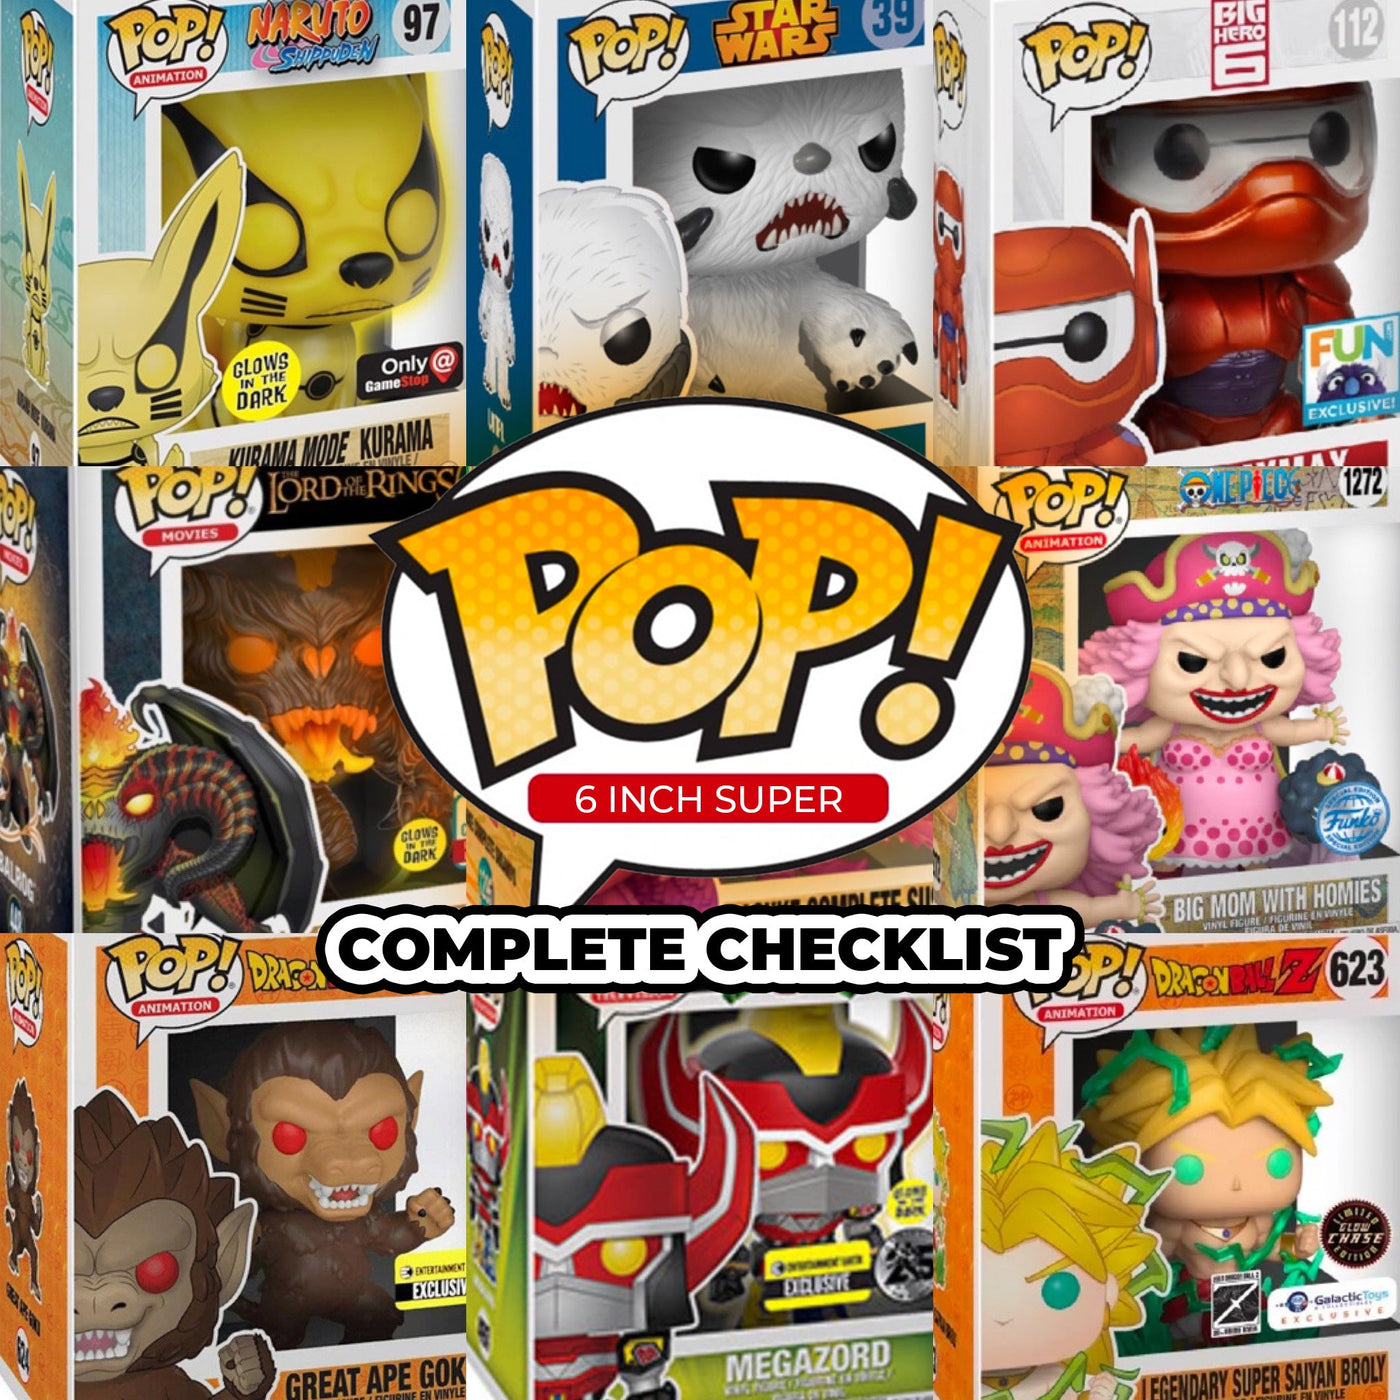 Funko Pop 6 inch Super Size Complete Checklist and Protectors by Display Geek